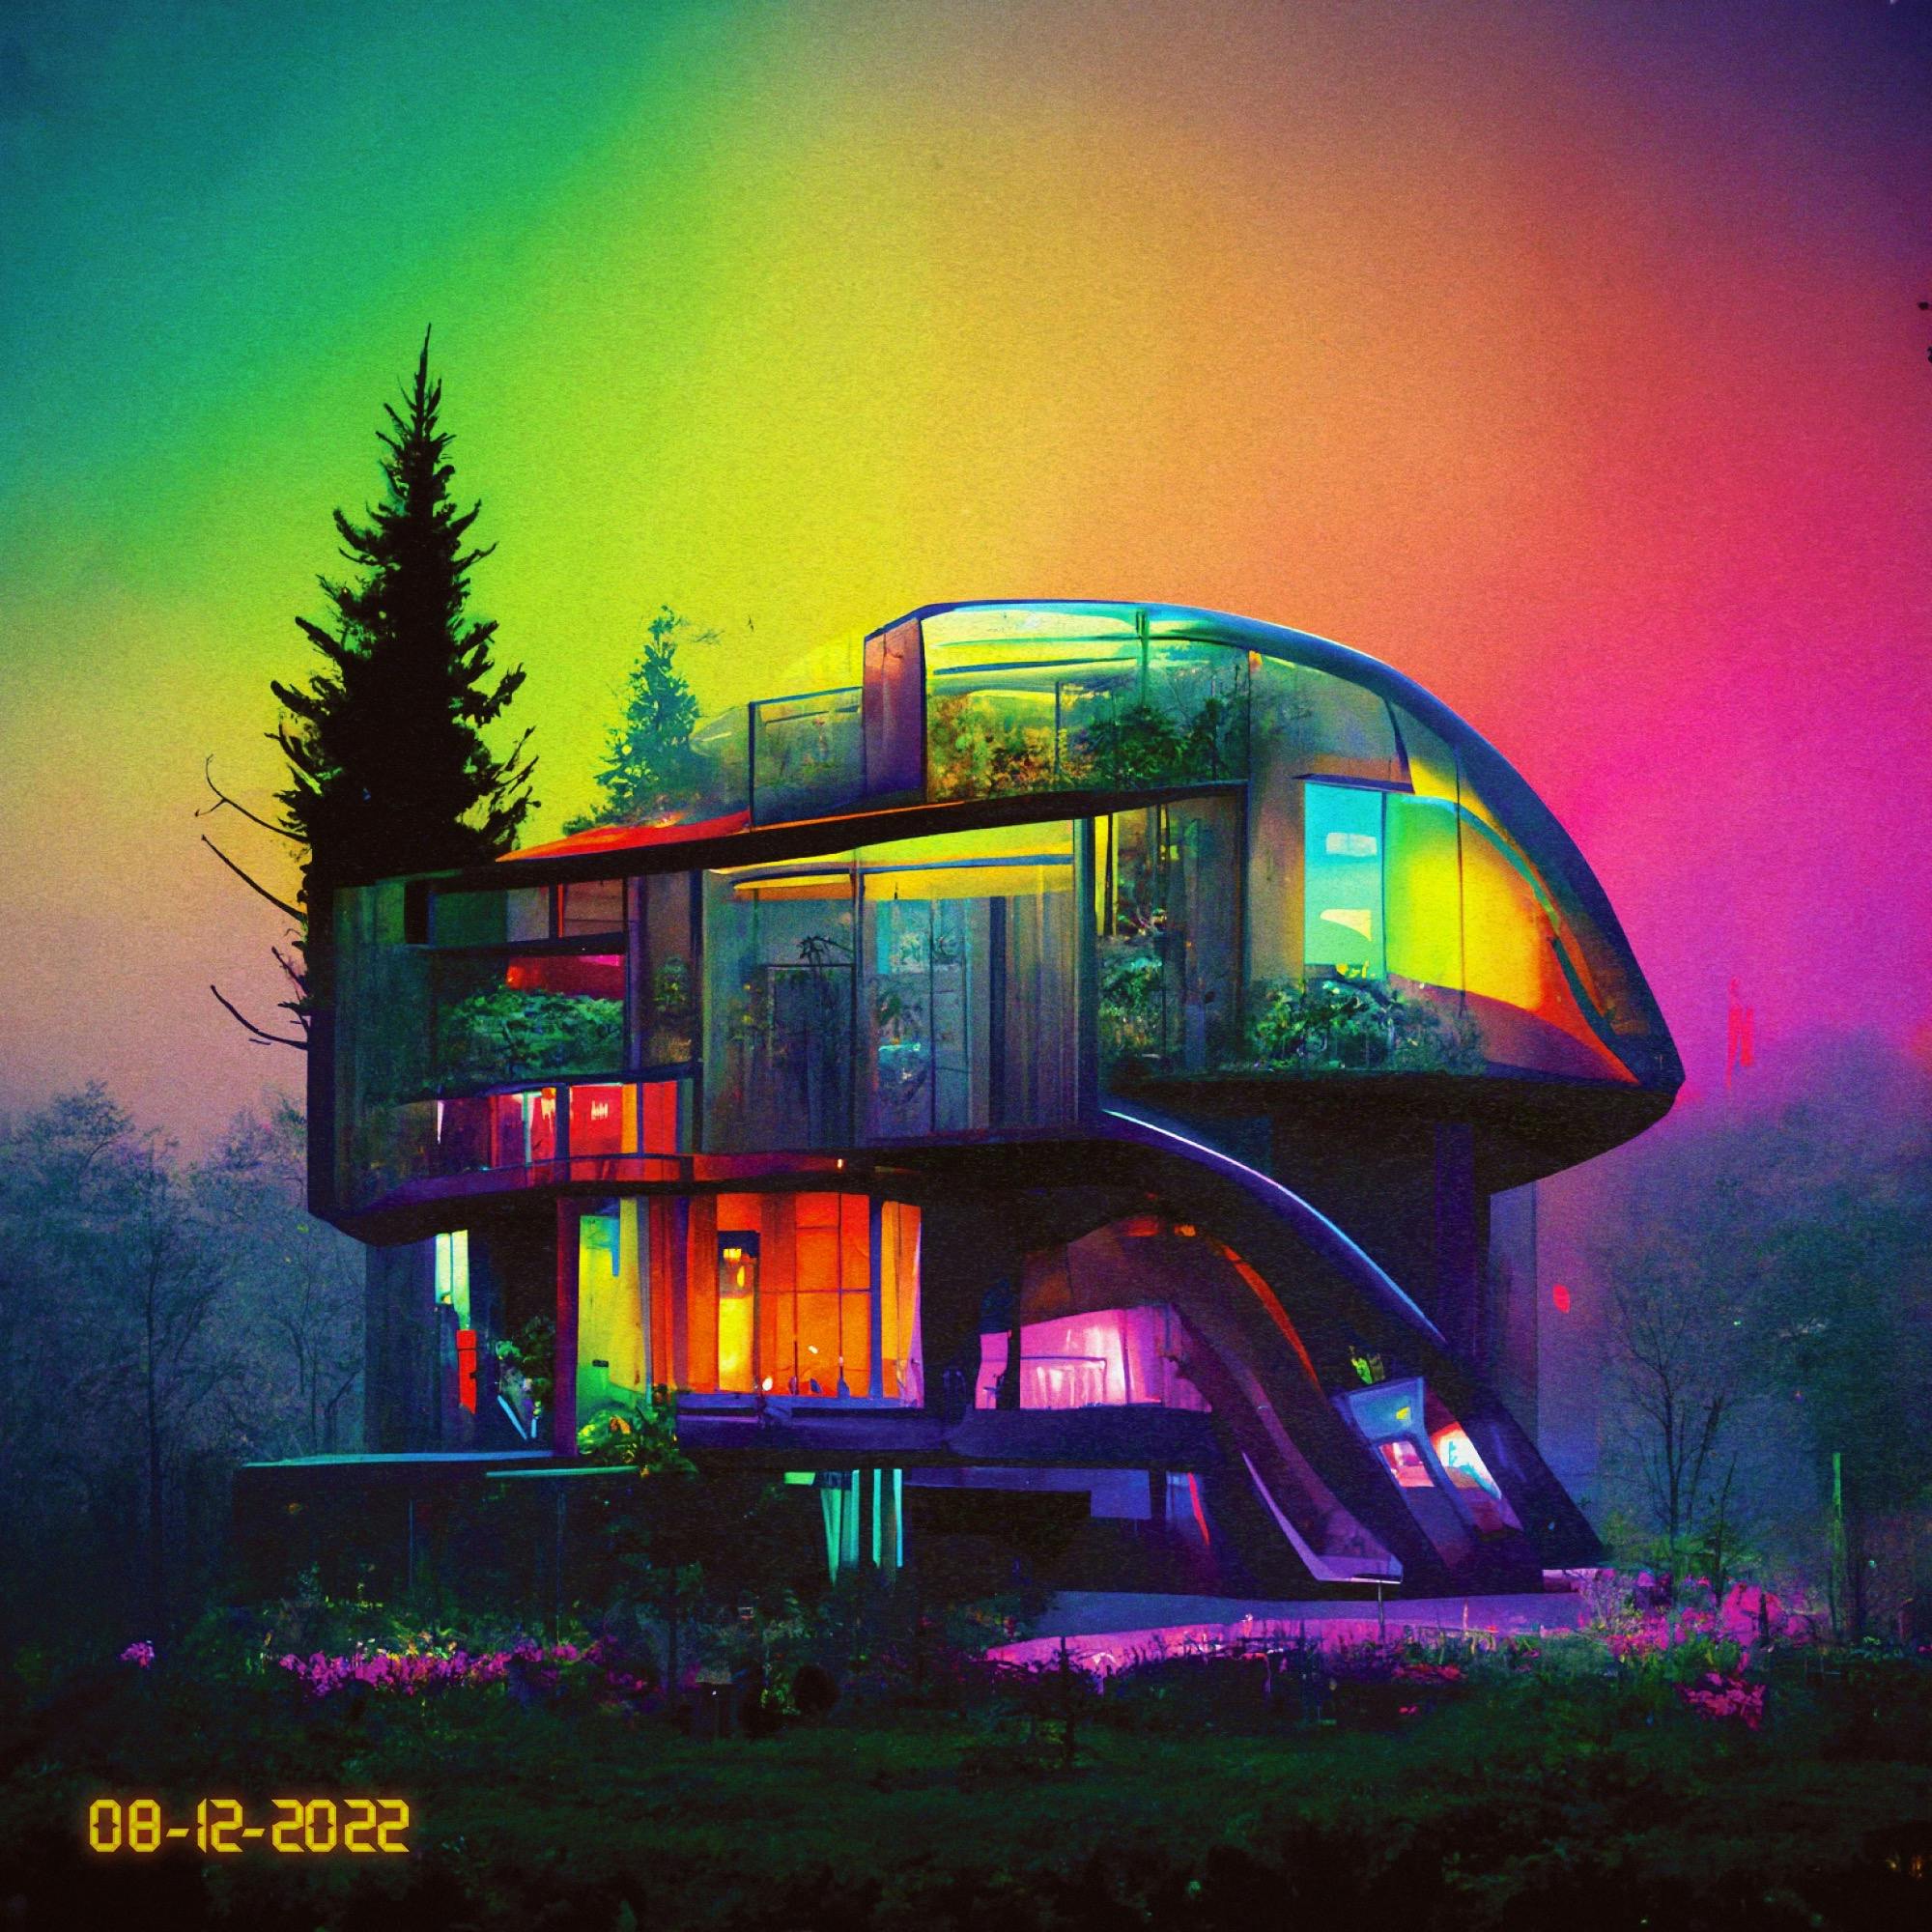 the motor-house location is somewhere on top of the mountain behind the stadium, and the right-hand side of the top floor was modeled to look like the iconic motorheadz helmet accented with a rainbow LED visor